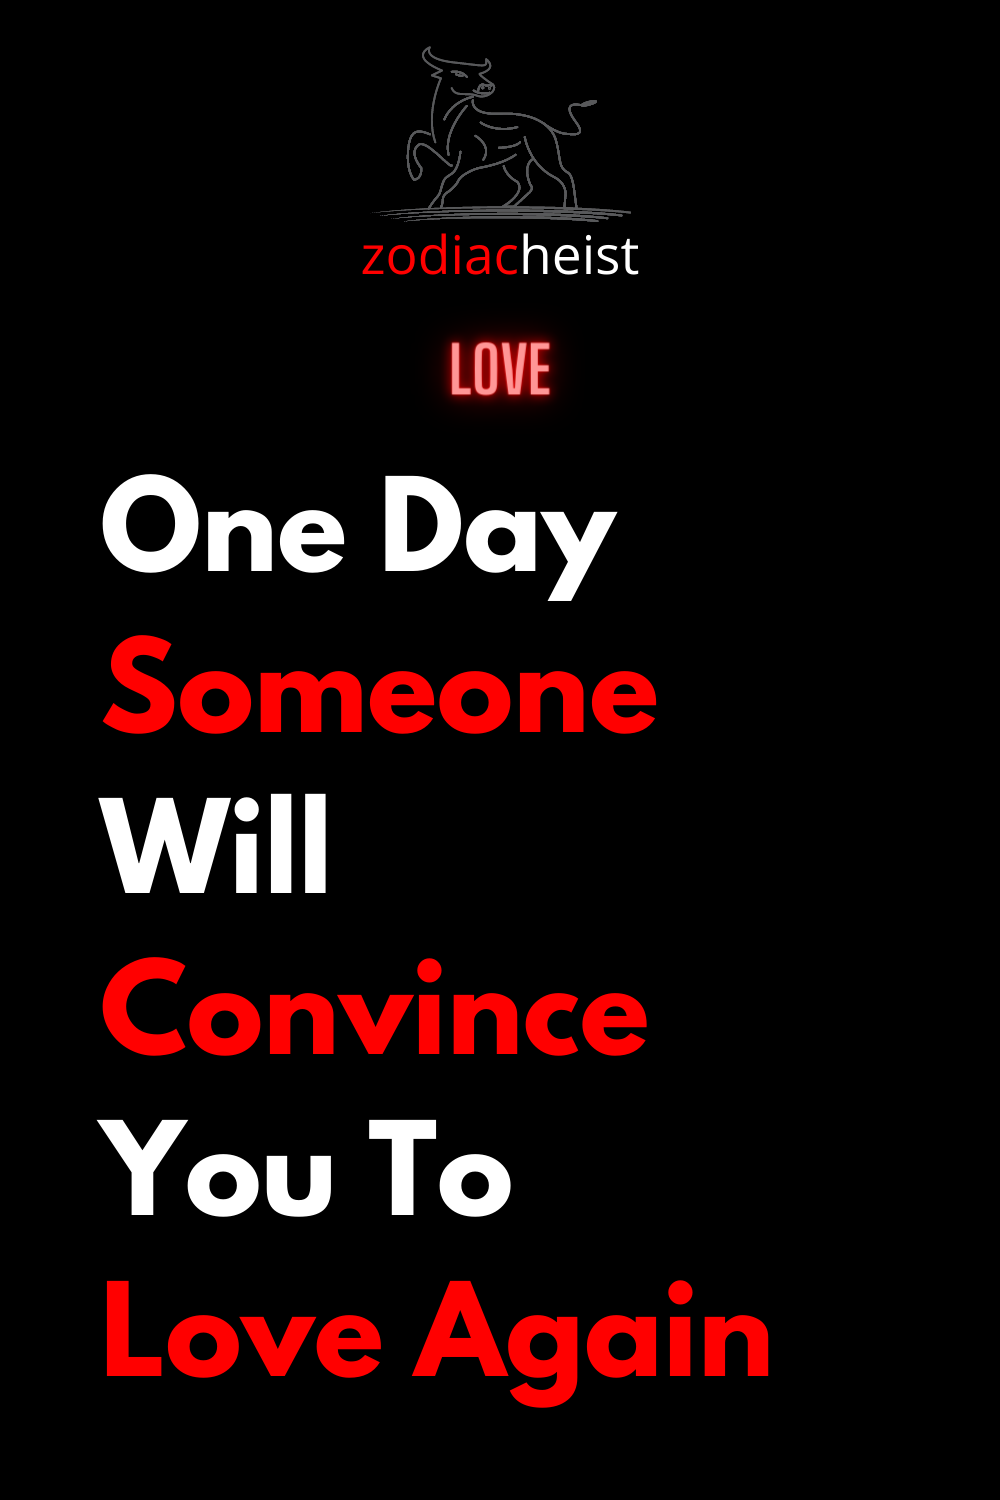 One Day Someone Will Convince You To Love Again